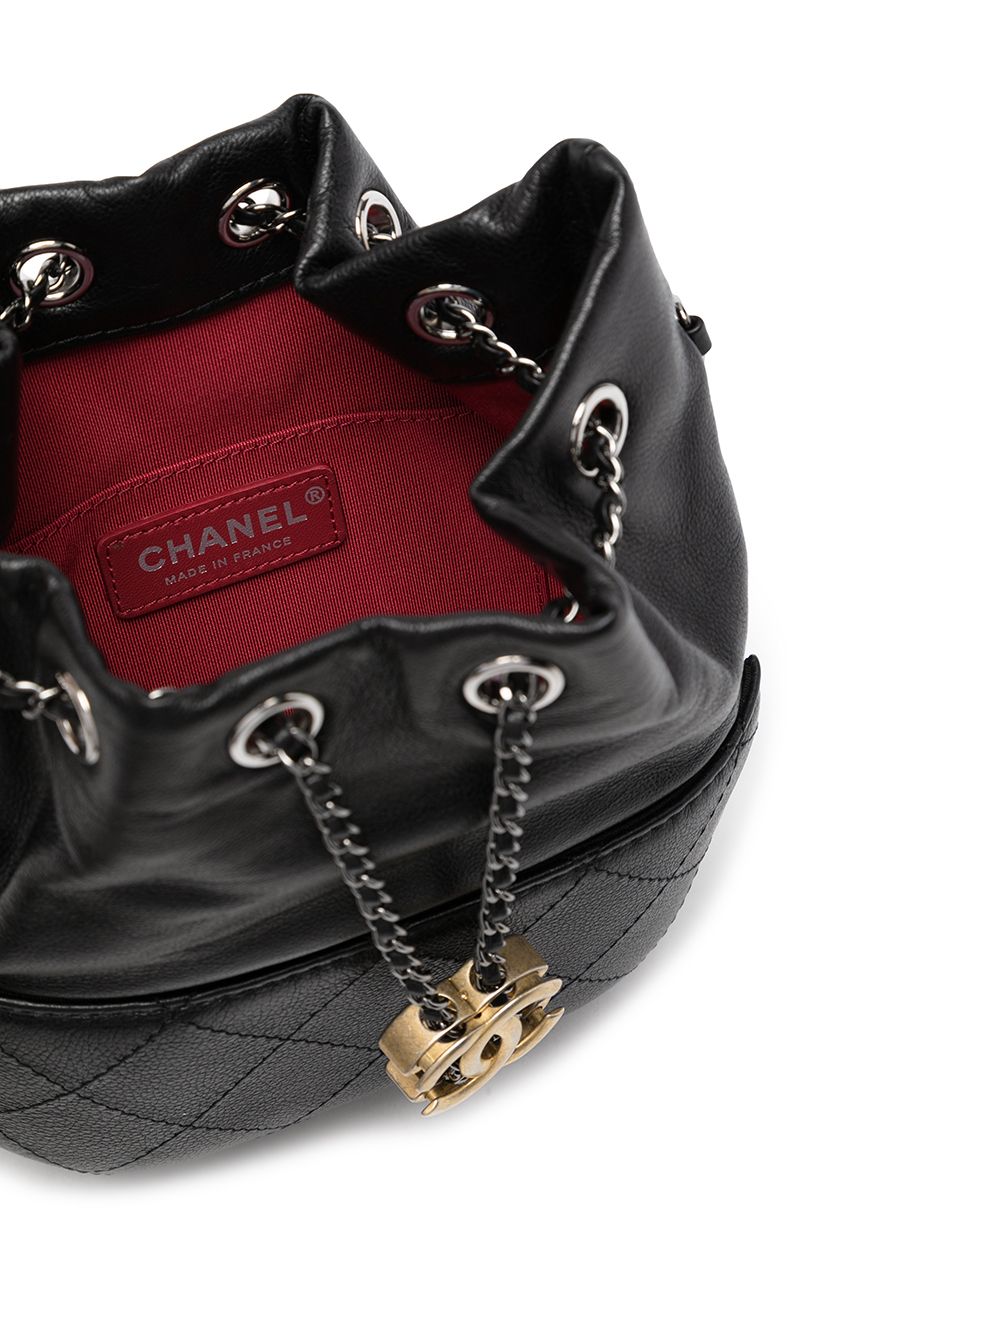 CHANEL Pre-Owned Small Gabrielle Drawstring Backpack - Farfetch